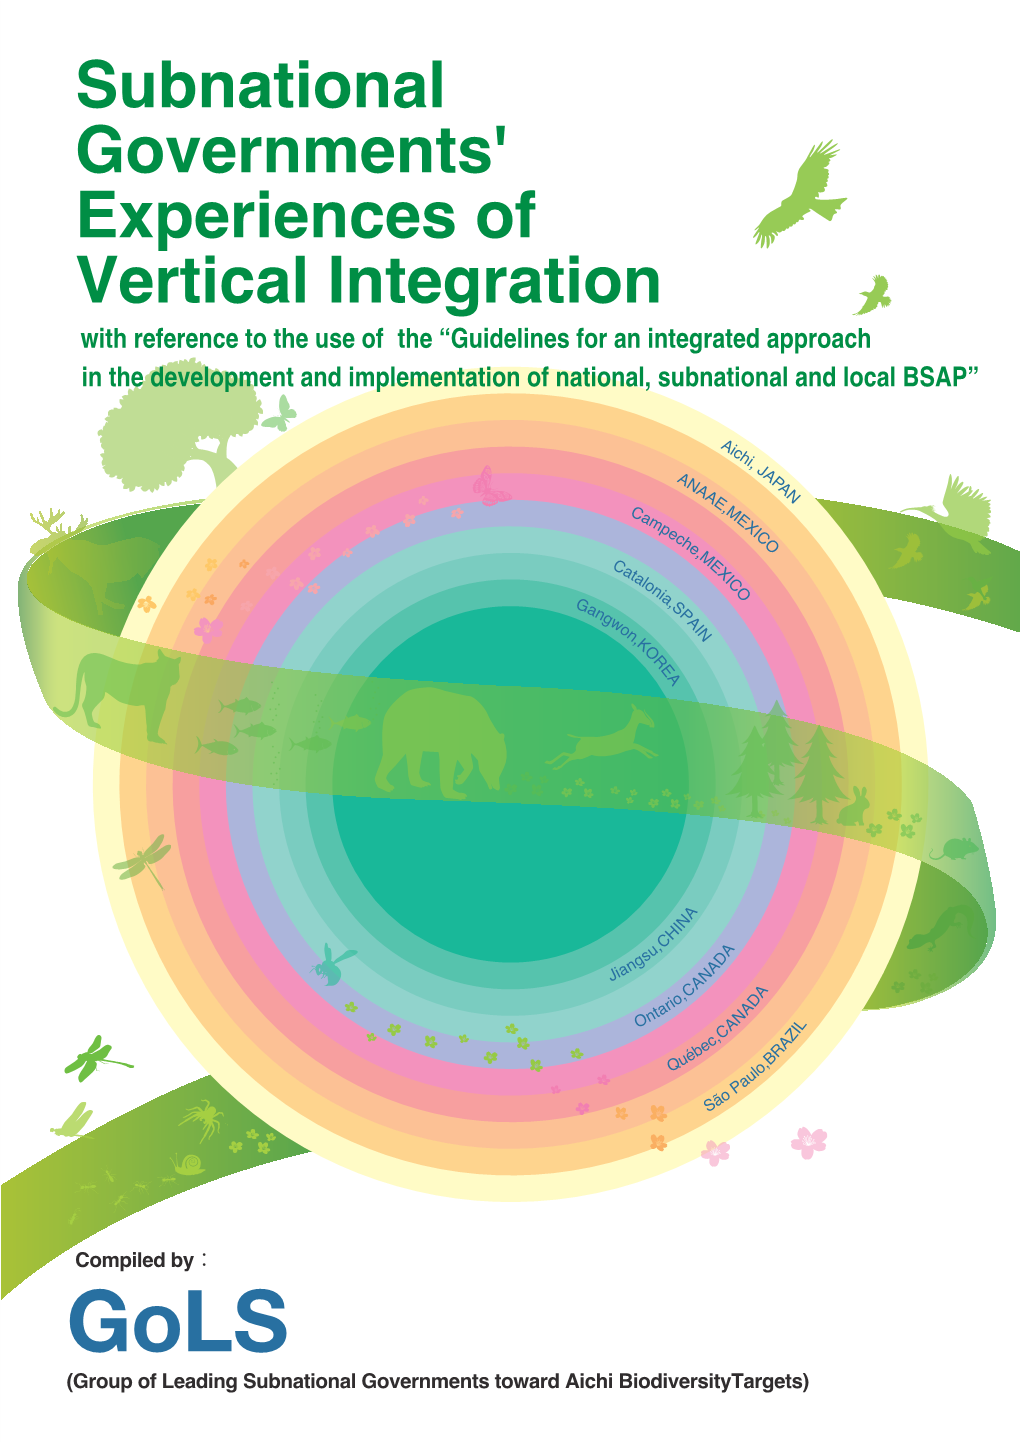 Subnational Governments' Experiences of Vertical Integration